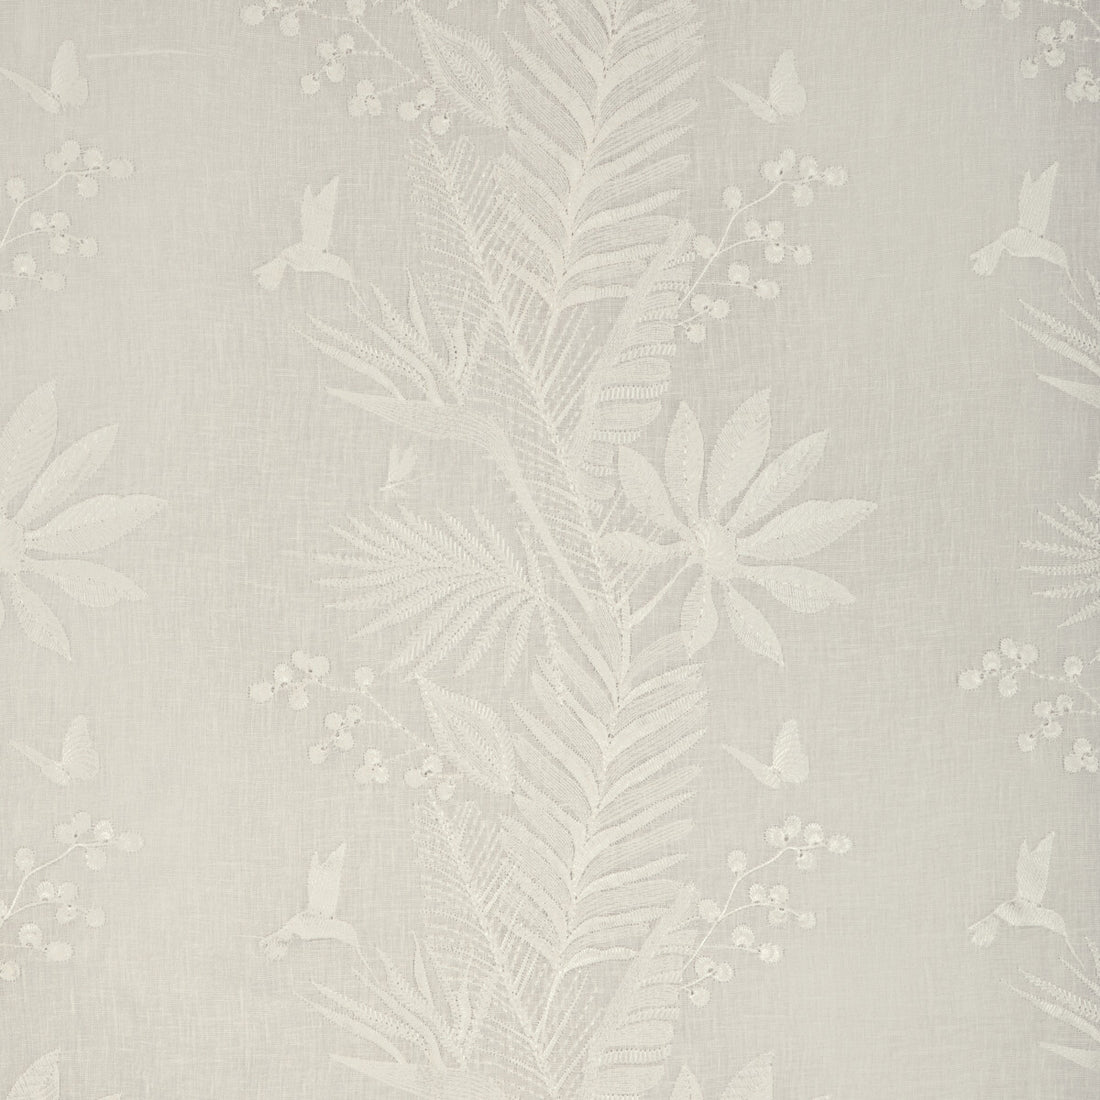 Manda Sheer fabric in 1 color - pattern 8023115.1.0 - by Brunschwig &amp; Fils in the Anduze Embroideries collection